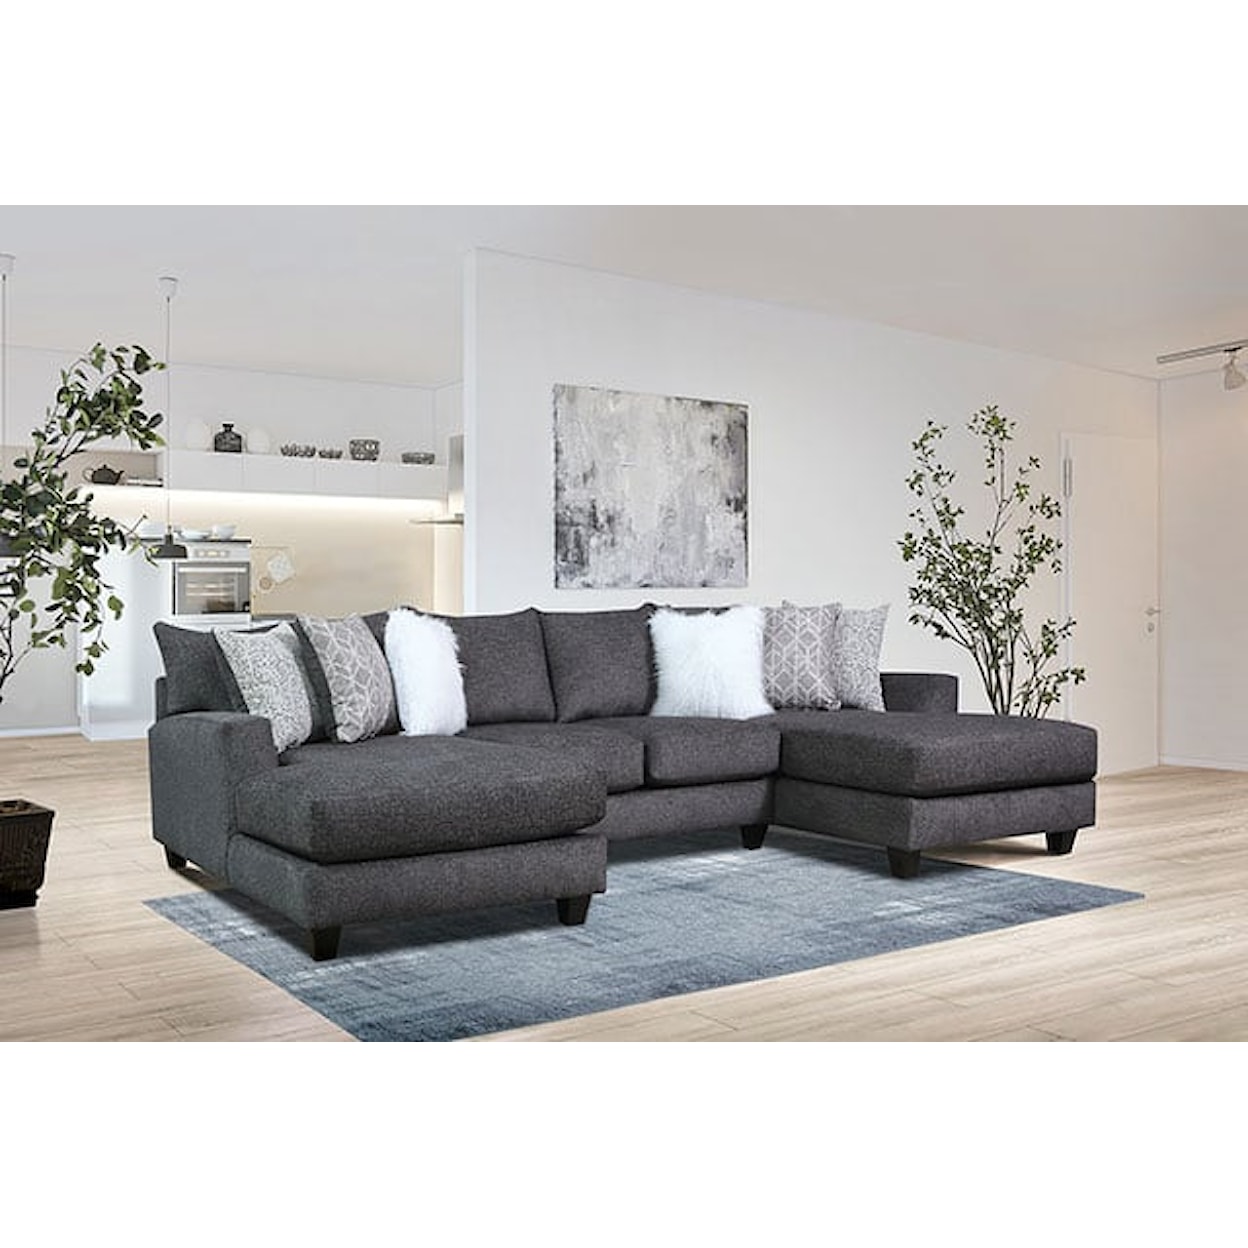 Furniture of America Kennington U-Shaped Sectional with Two Chaises